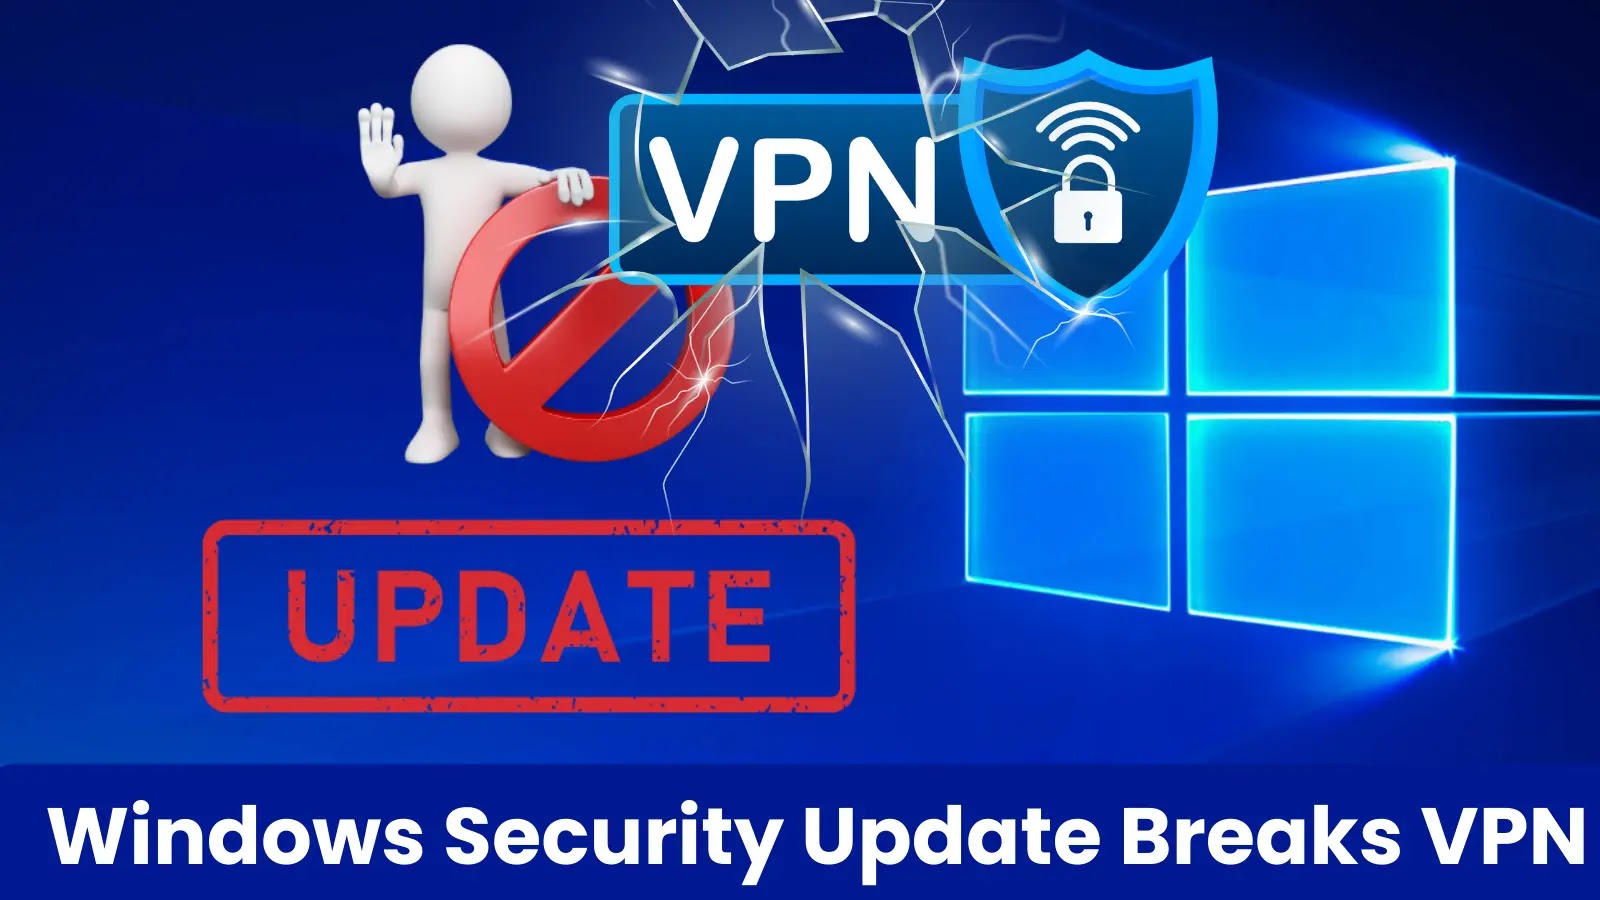 Attention all Windows Users! The Microsoft April Security Update Could Break Your VPN